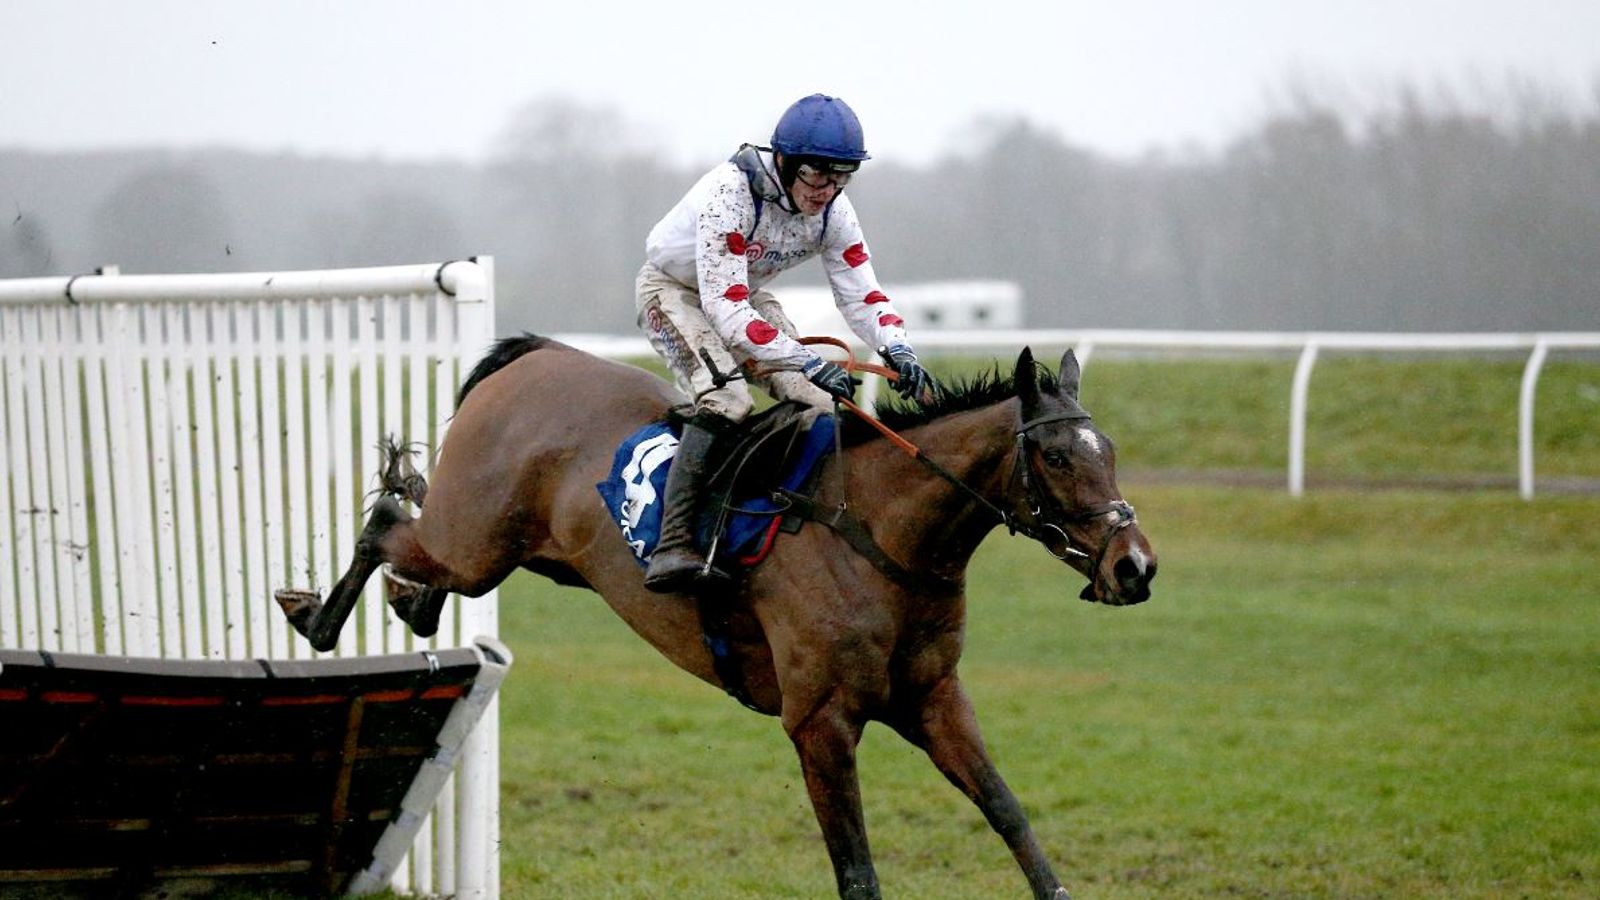 Challow Novices’ Hurdle: Hermes Allen destroys rivals at Newbury to go 7/2 favourite for Ballymore at Cheltenham